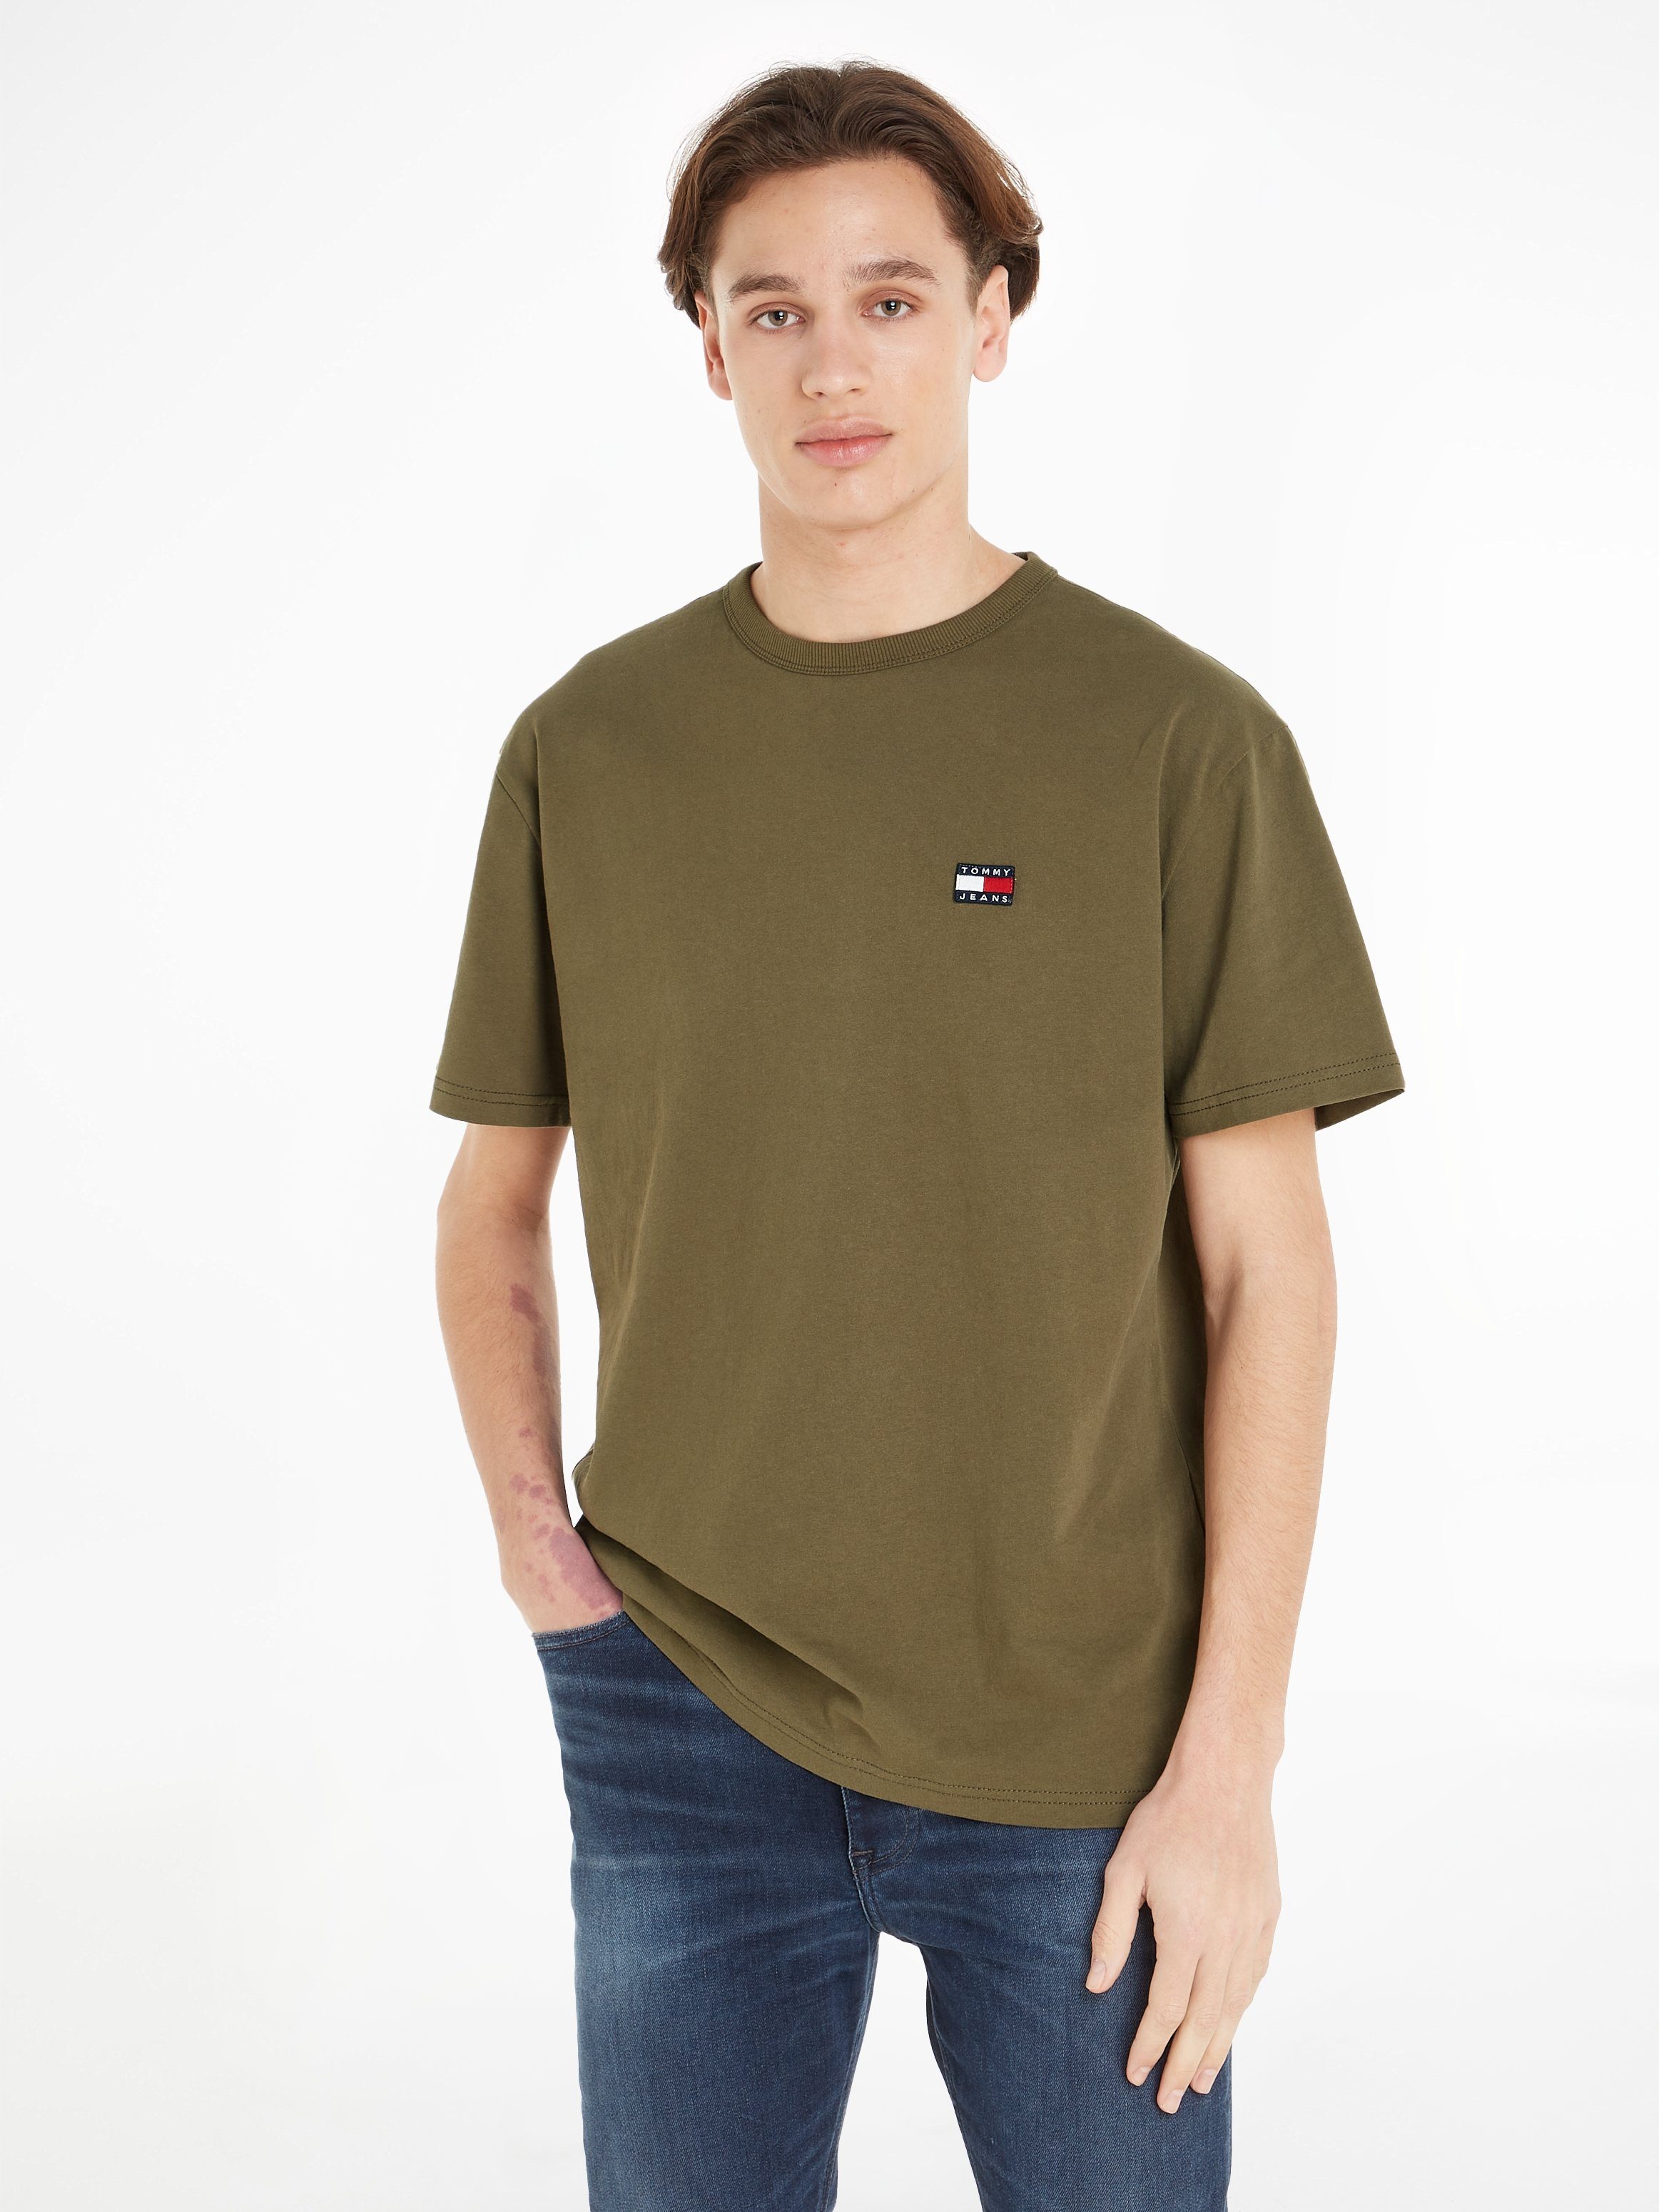 XS Jeans Olive TOMMY TEE BADGE Tommy T-Shirt TJM CLSC Drab Green